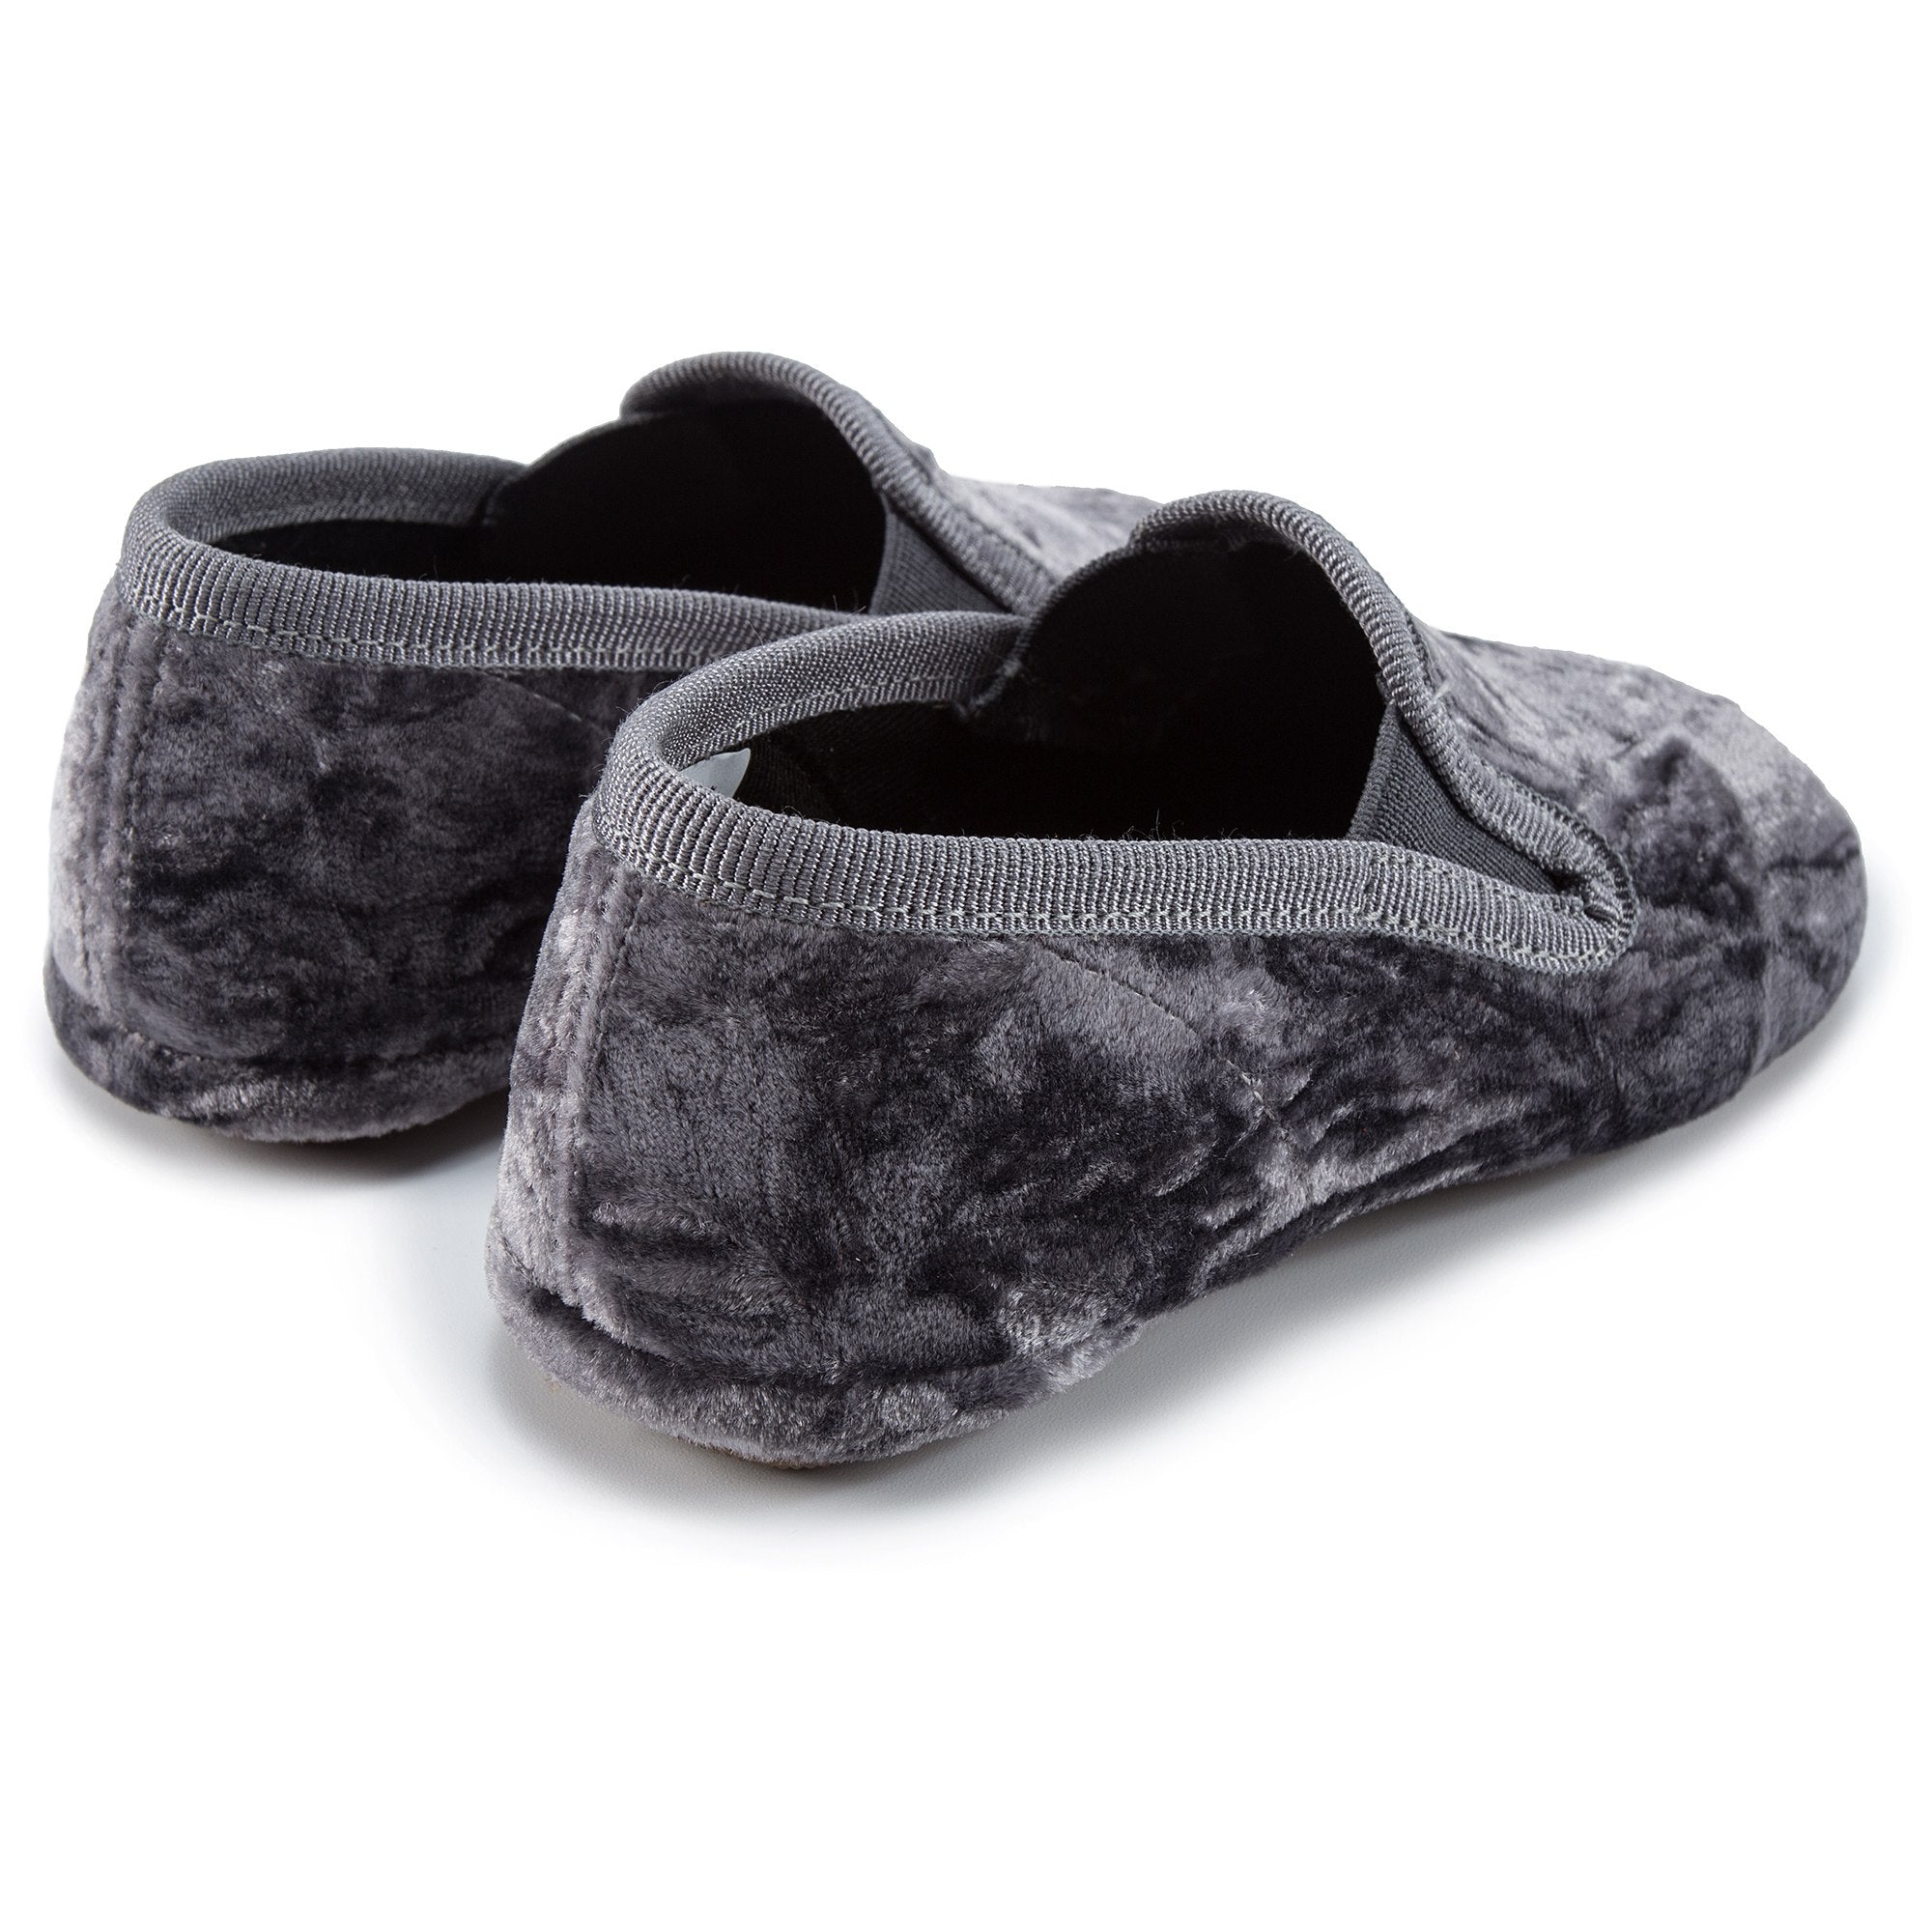 Girls Grey Loafers